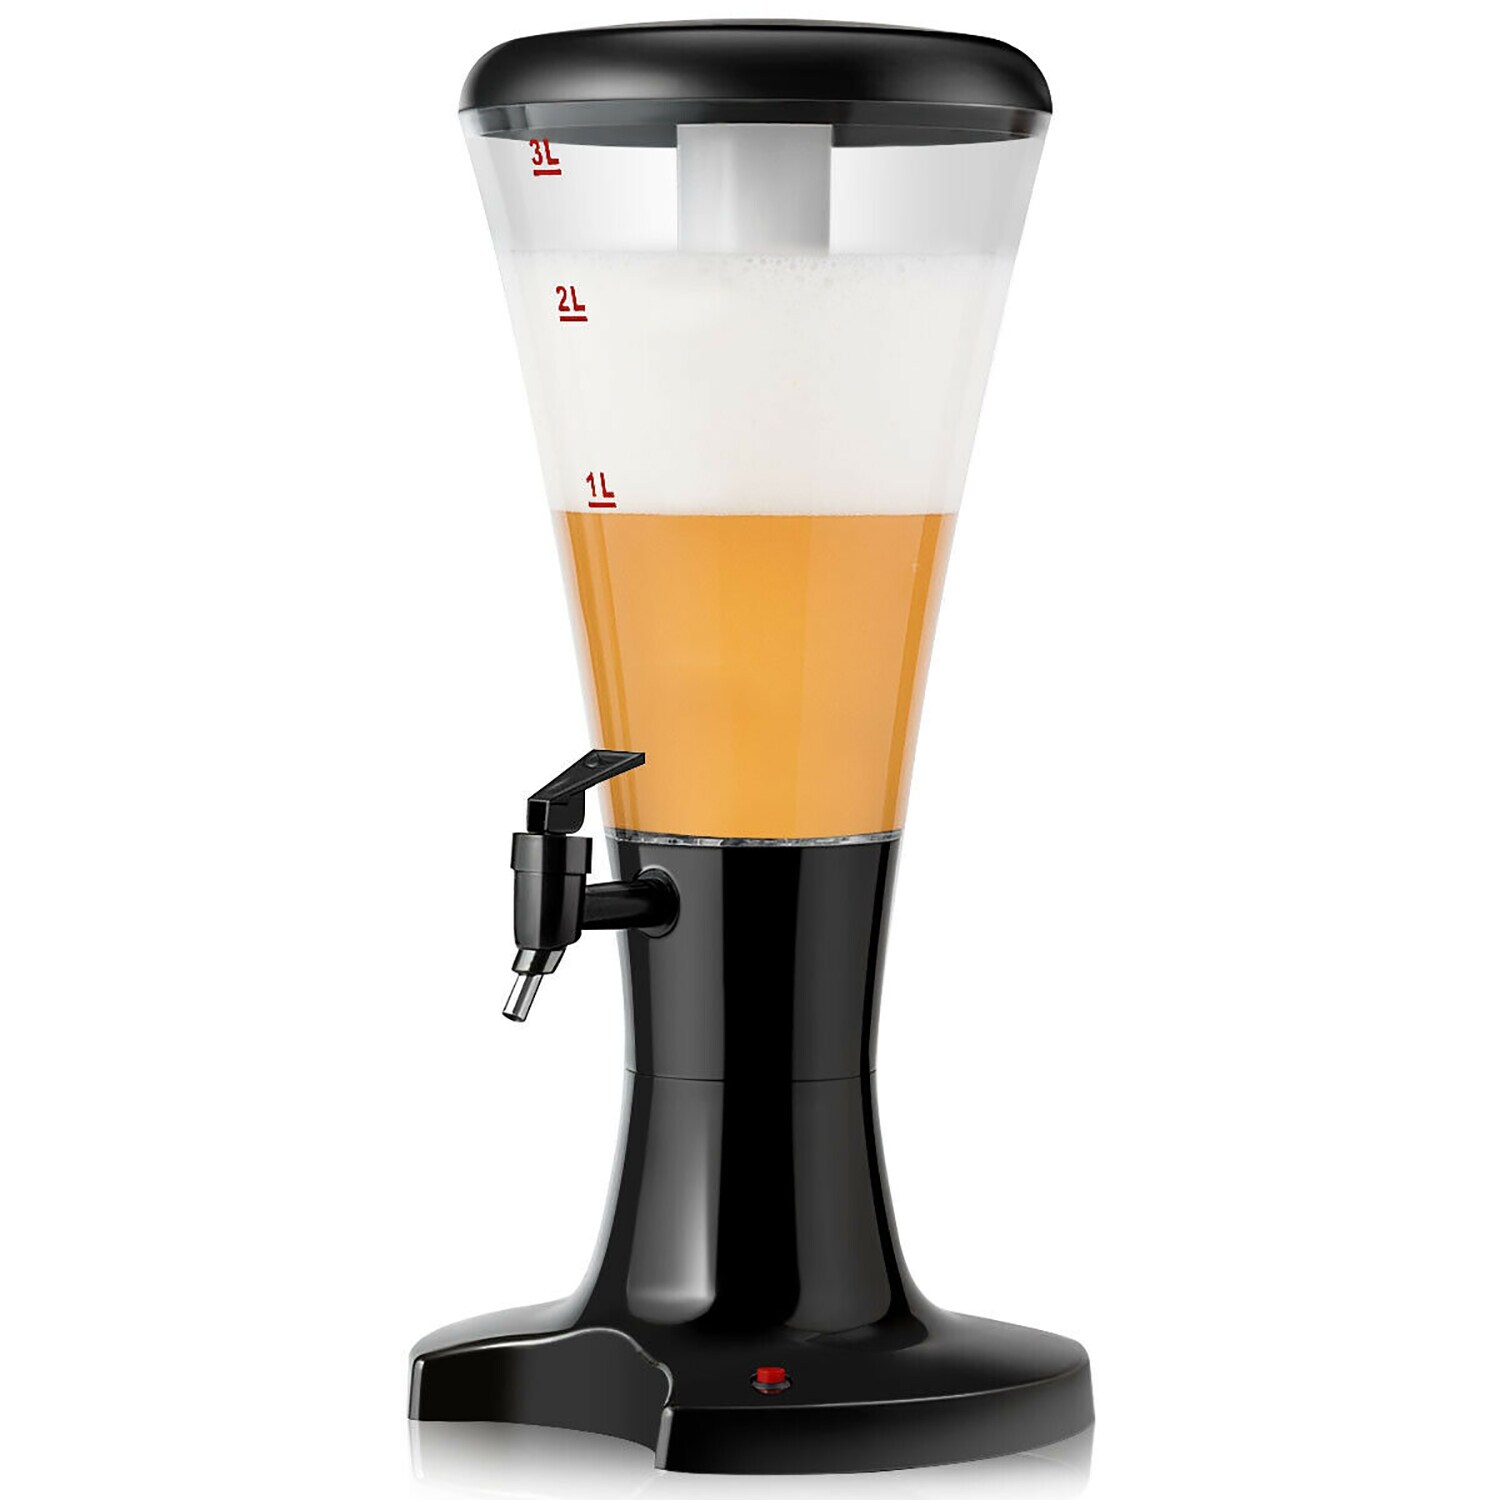 3L glass beverage dispenser for 11$ Designed to fit practically in fridges  and on counter tops